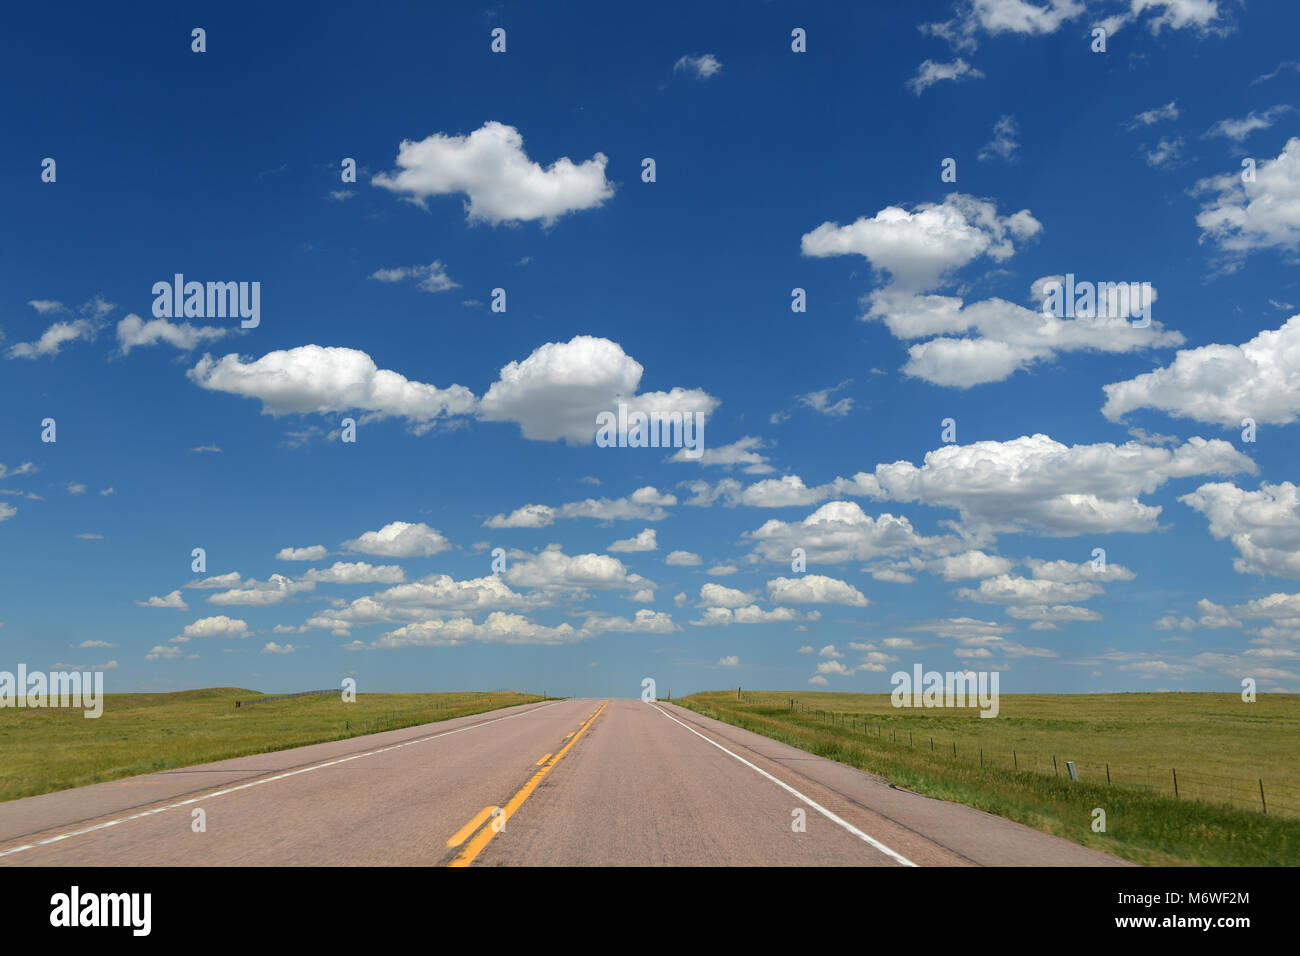 Road and landscape with clouds and blue skies Stock Photo